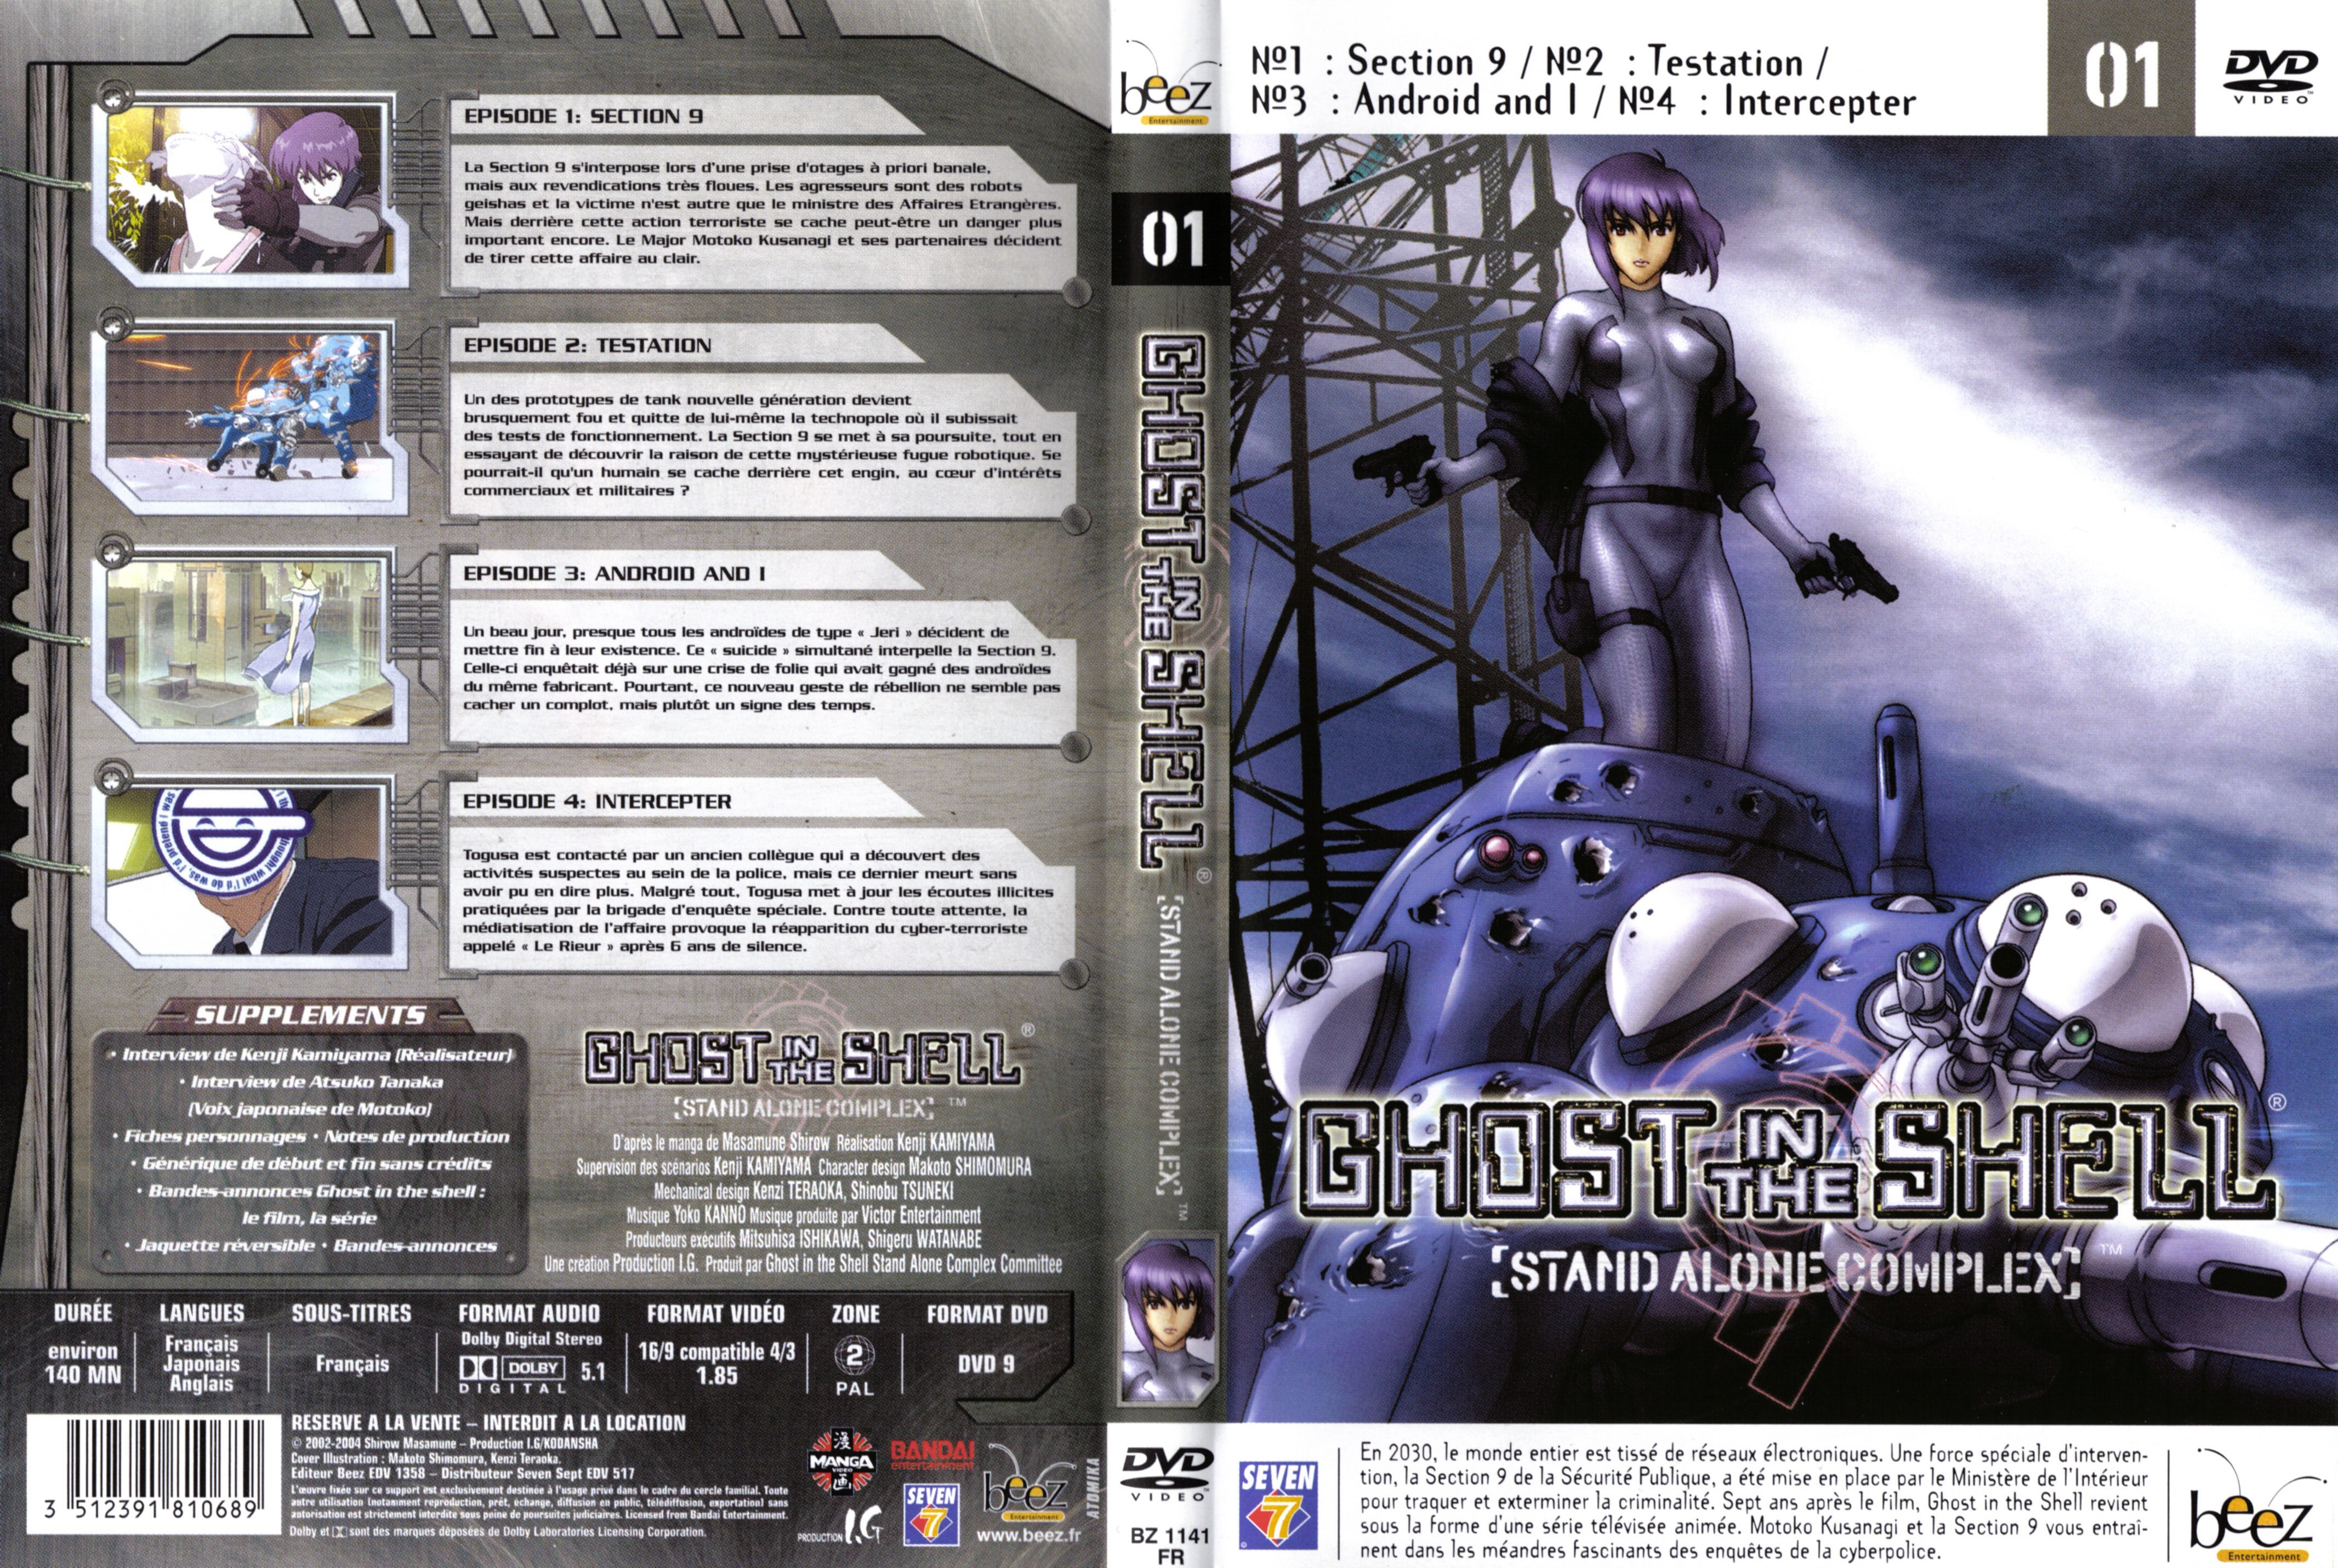 Jaquette DVD Ghost in the shell - stand alone complex vol 1